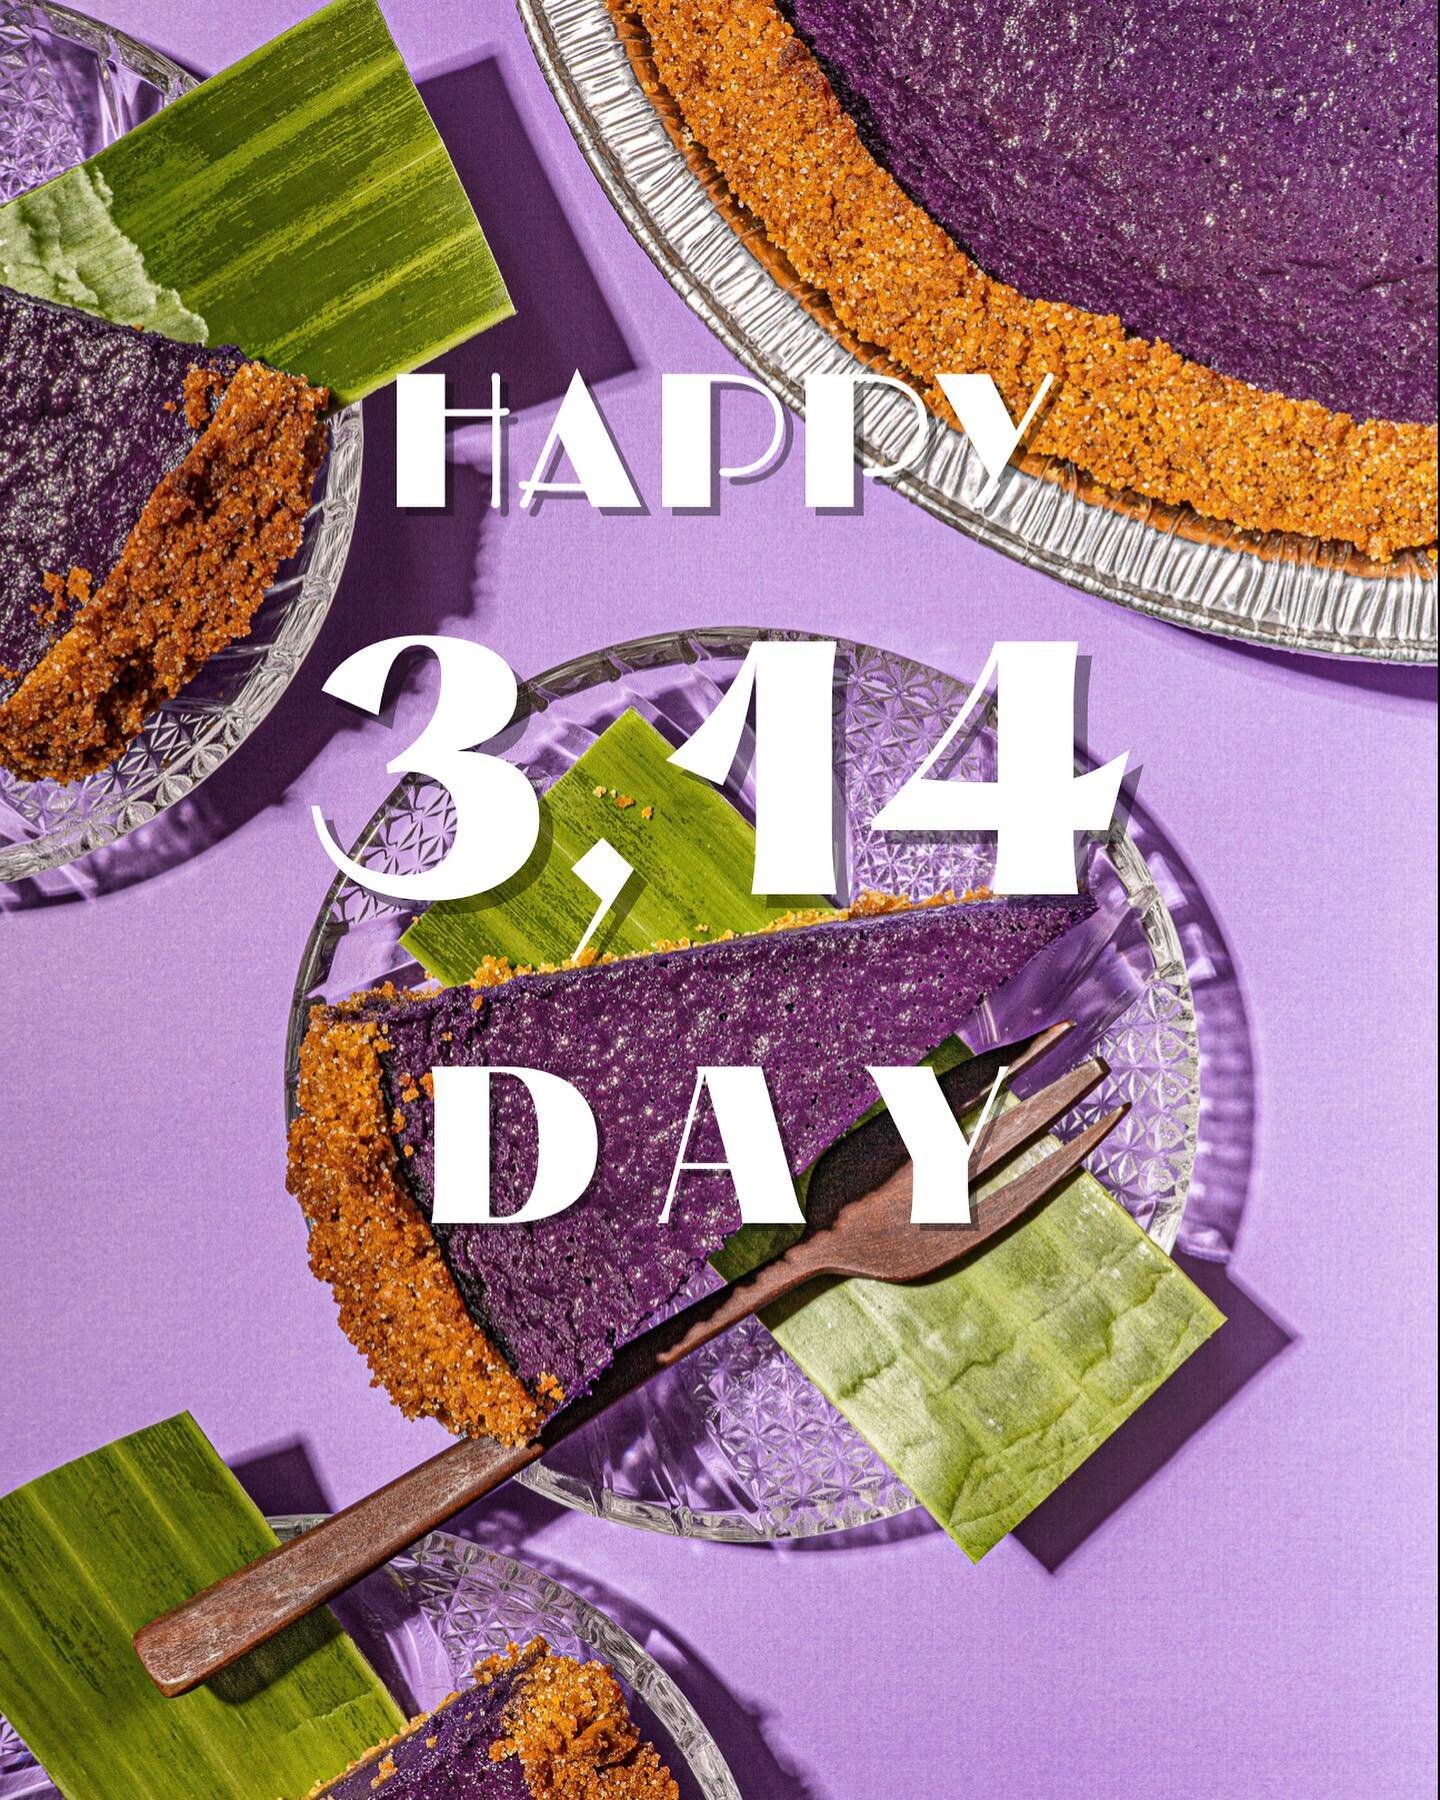 Celebrate Pi Day on 3&bull;14 with #BayAreaFilipinoPies! We&rsquo;re bringing you our bestsellers; Calamansi, Ube, Turon and Pandan Macapuno. 

Available for Oakland (11am to 1pm) and SF (3:30pm to 5:30pm) pickup on Sunday, 3&bull;13. 

Preorder your